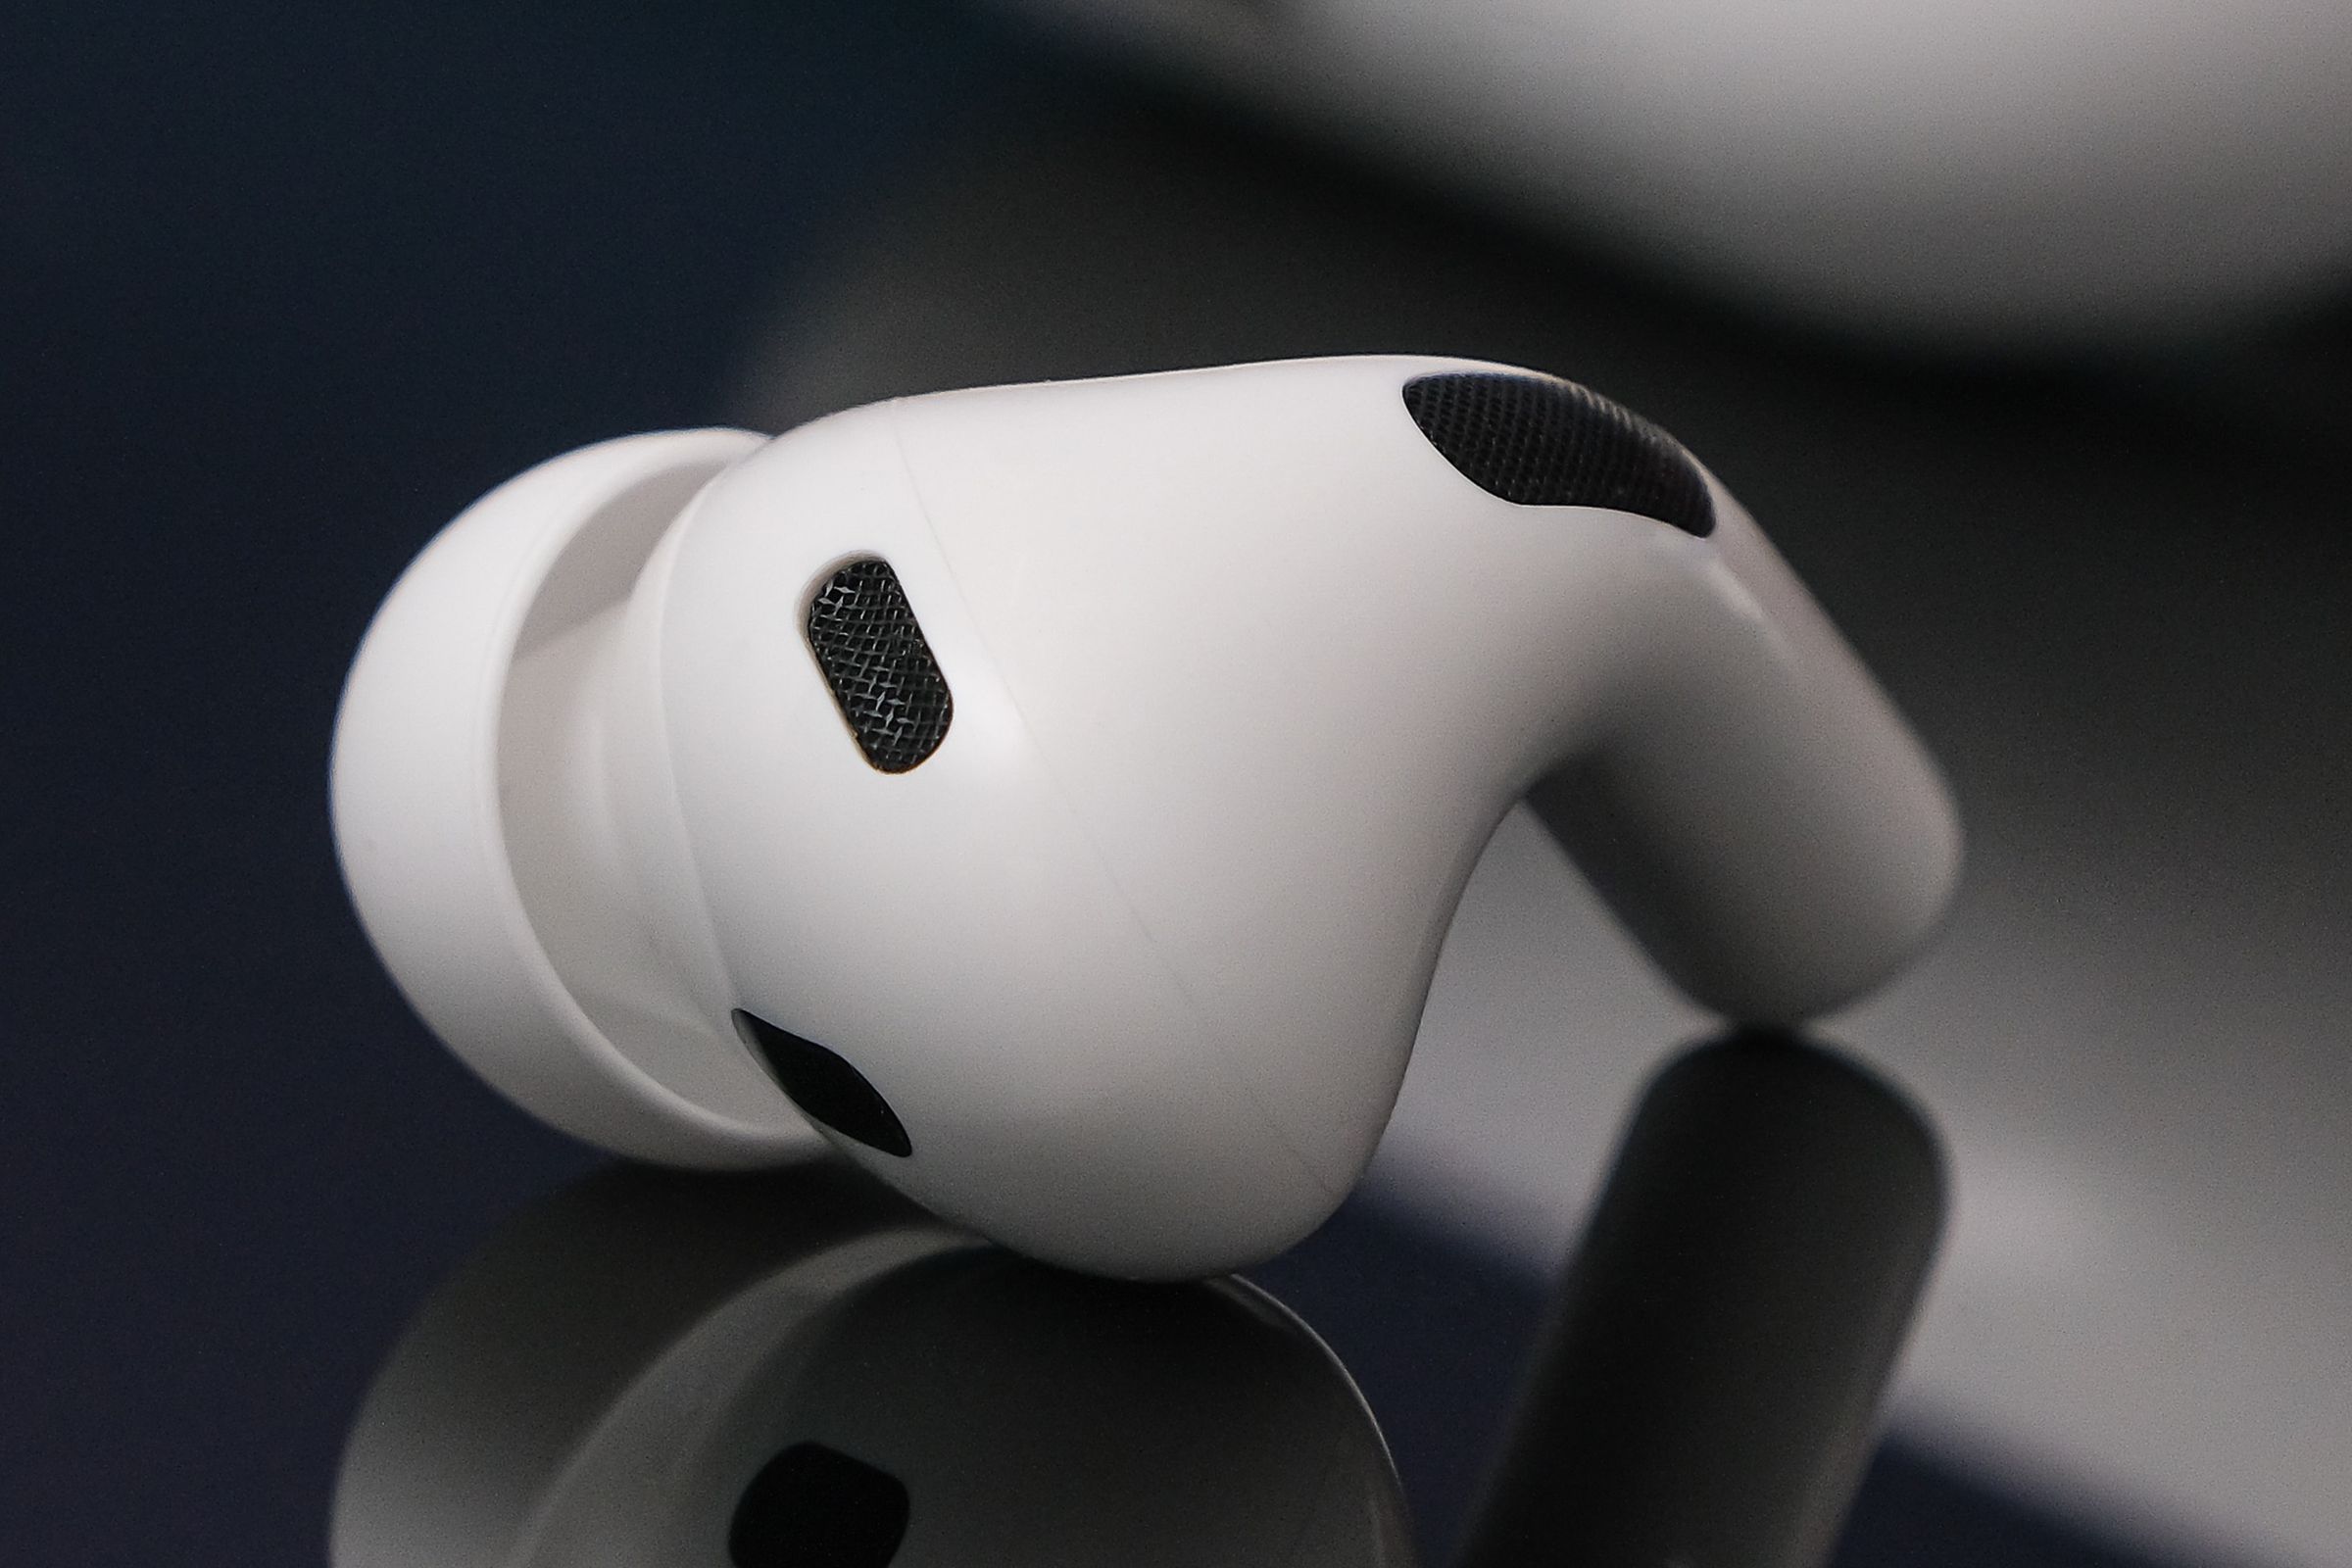 A close-up detail image of Apple’s second-generation AirPods Pro.